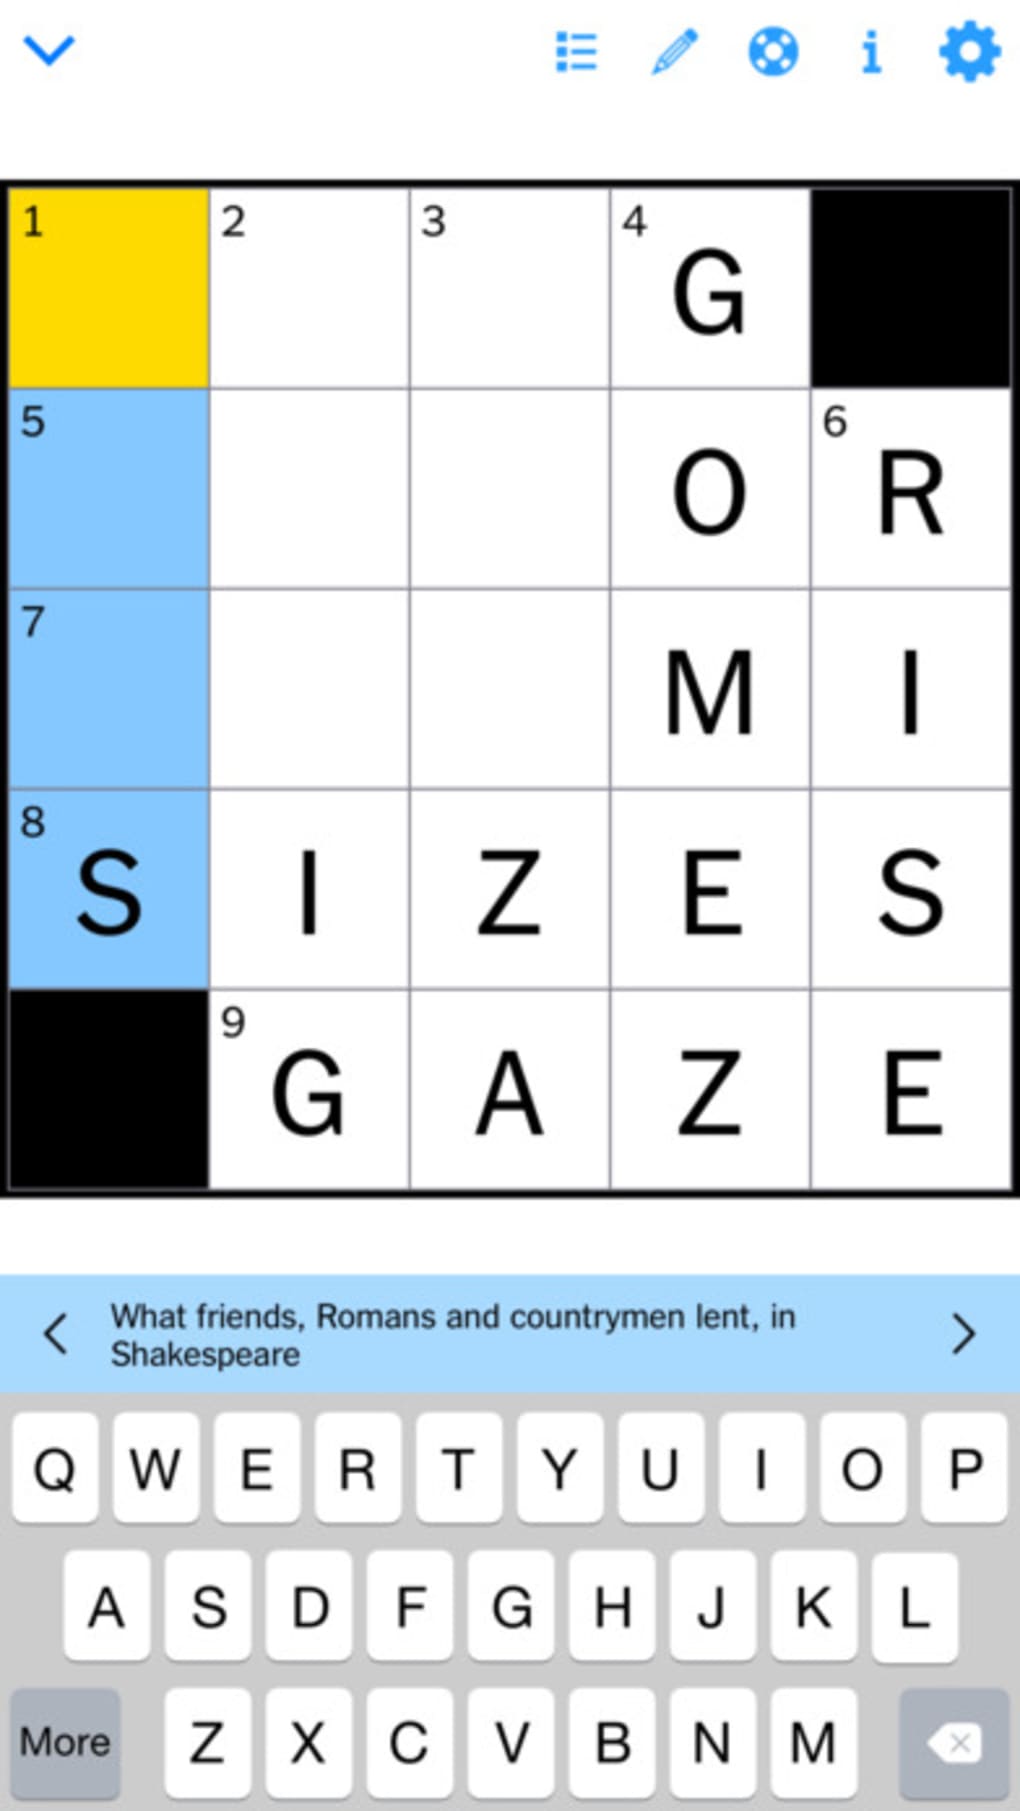 nytimes puzzles dept